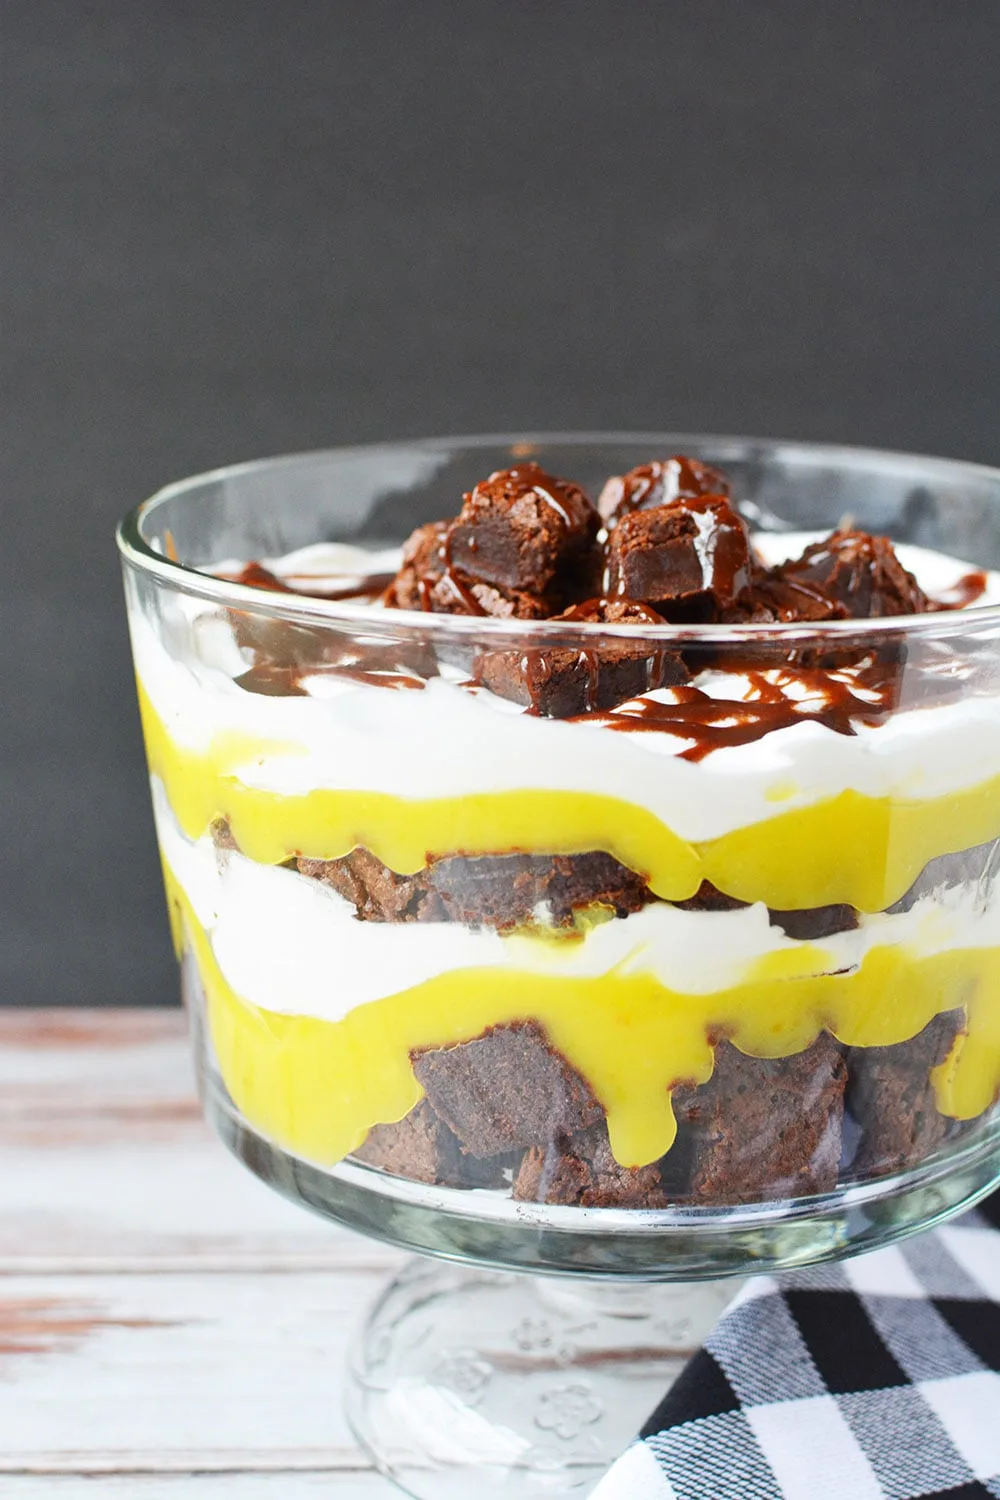 Layers of brownies, pudding, and whipped cream in a trifle dish.